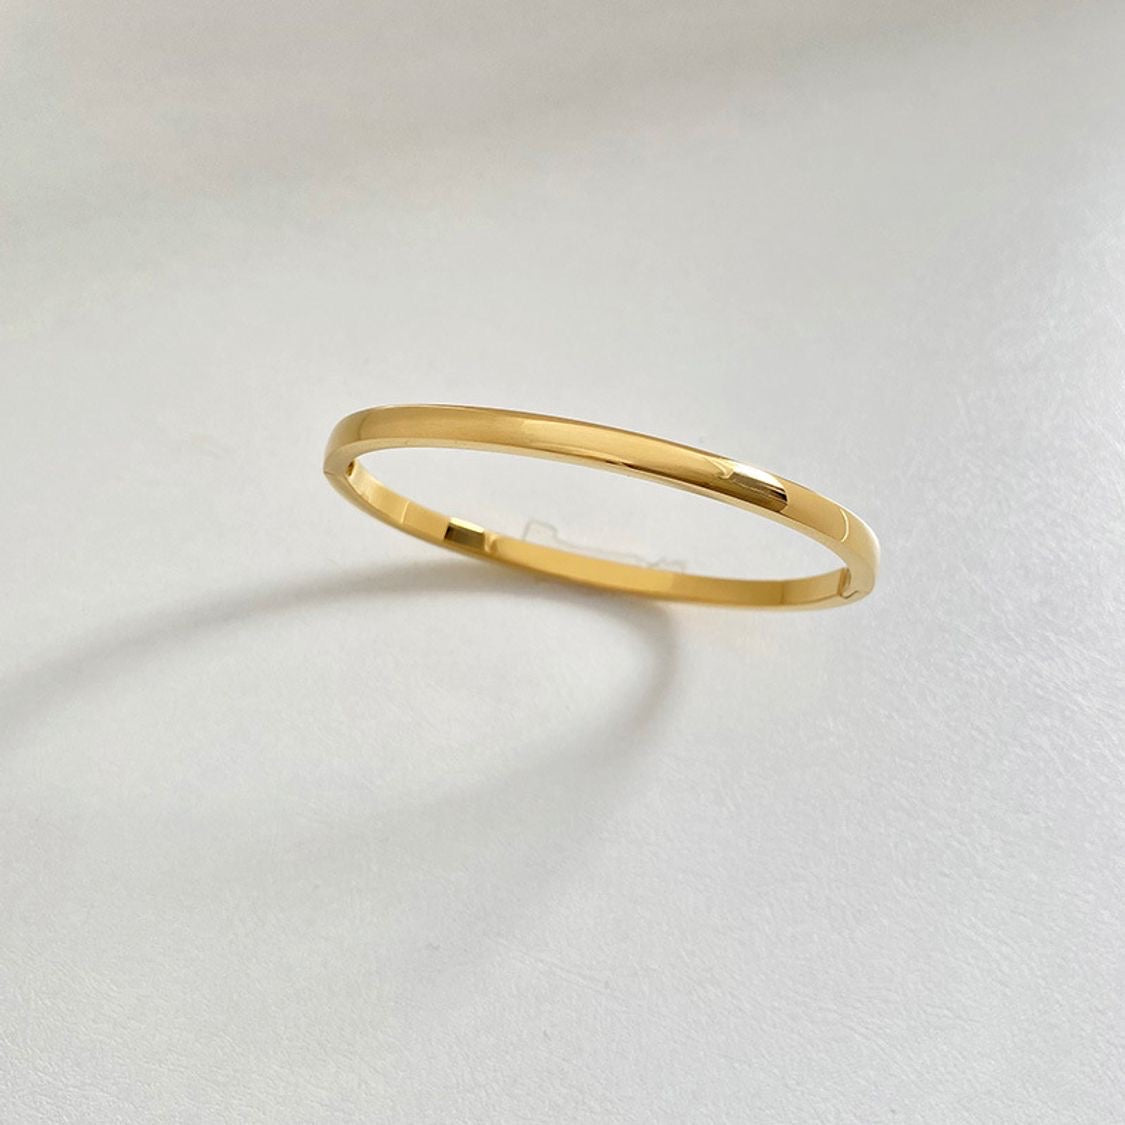 Bracelet "LOVE S" made of stainless steel with 18K gold plating